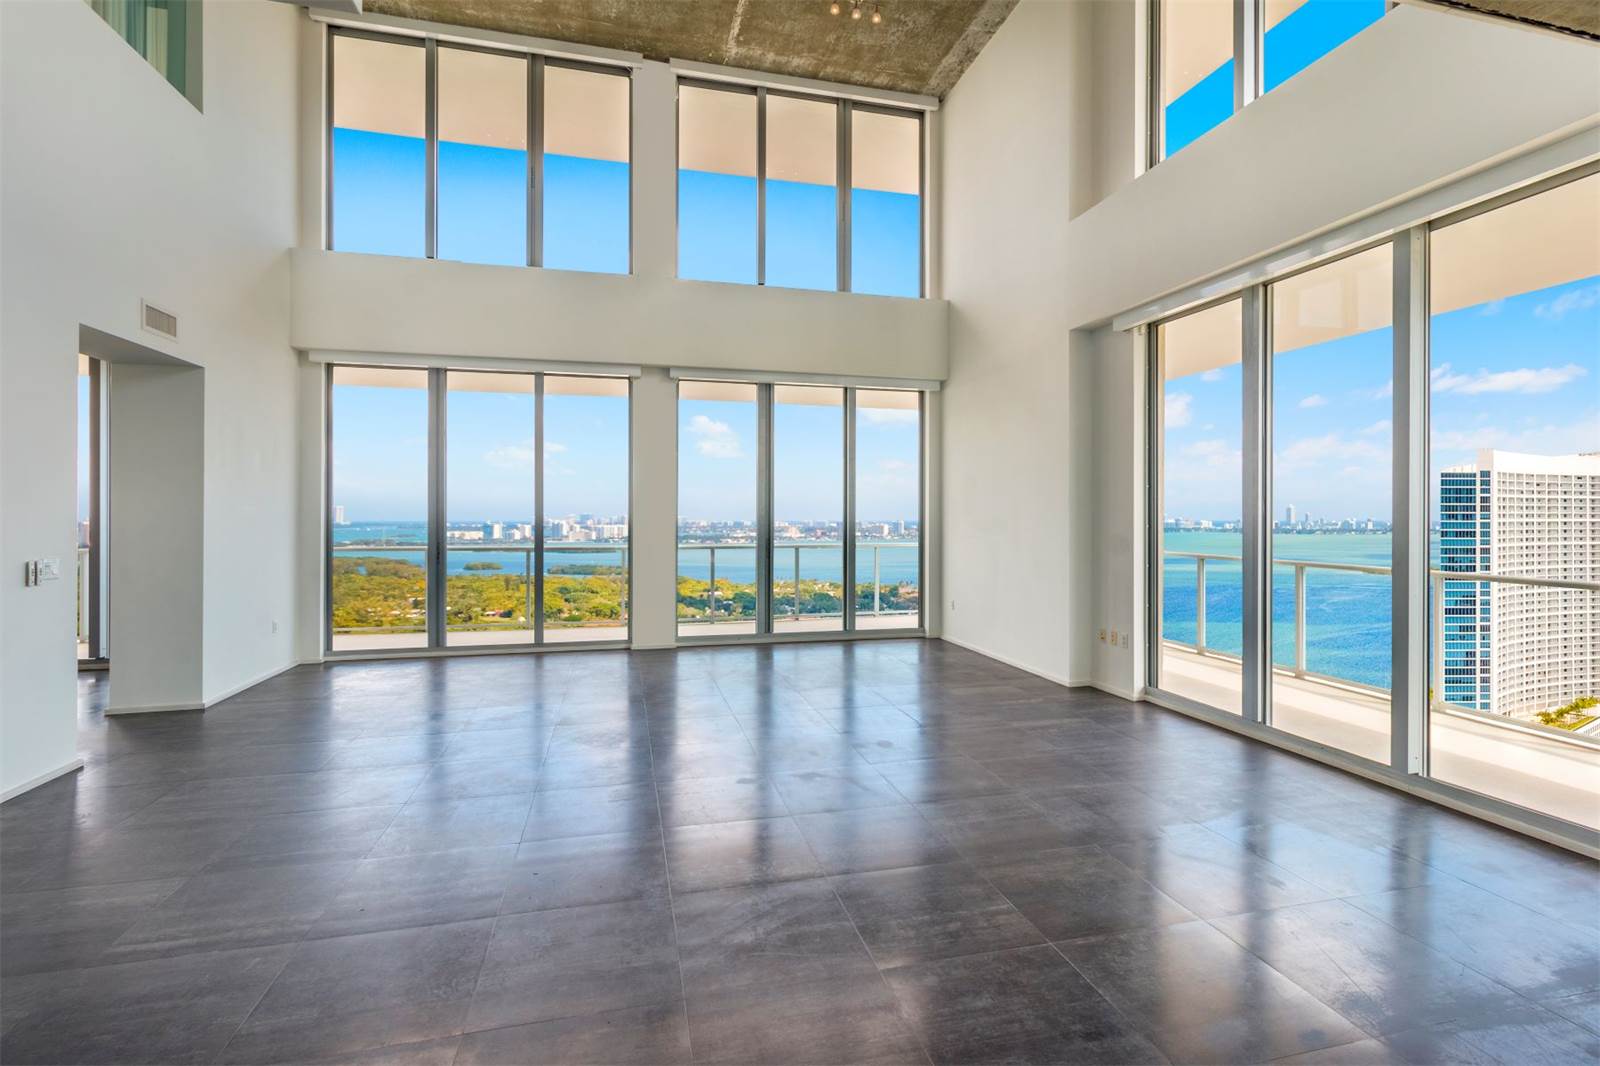 double-height ceilings in a midtown miami penthouse with bay views and floor-to-ceiling windows